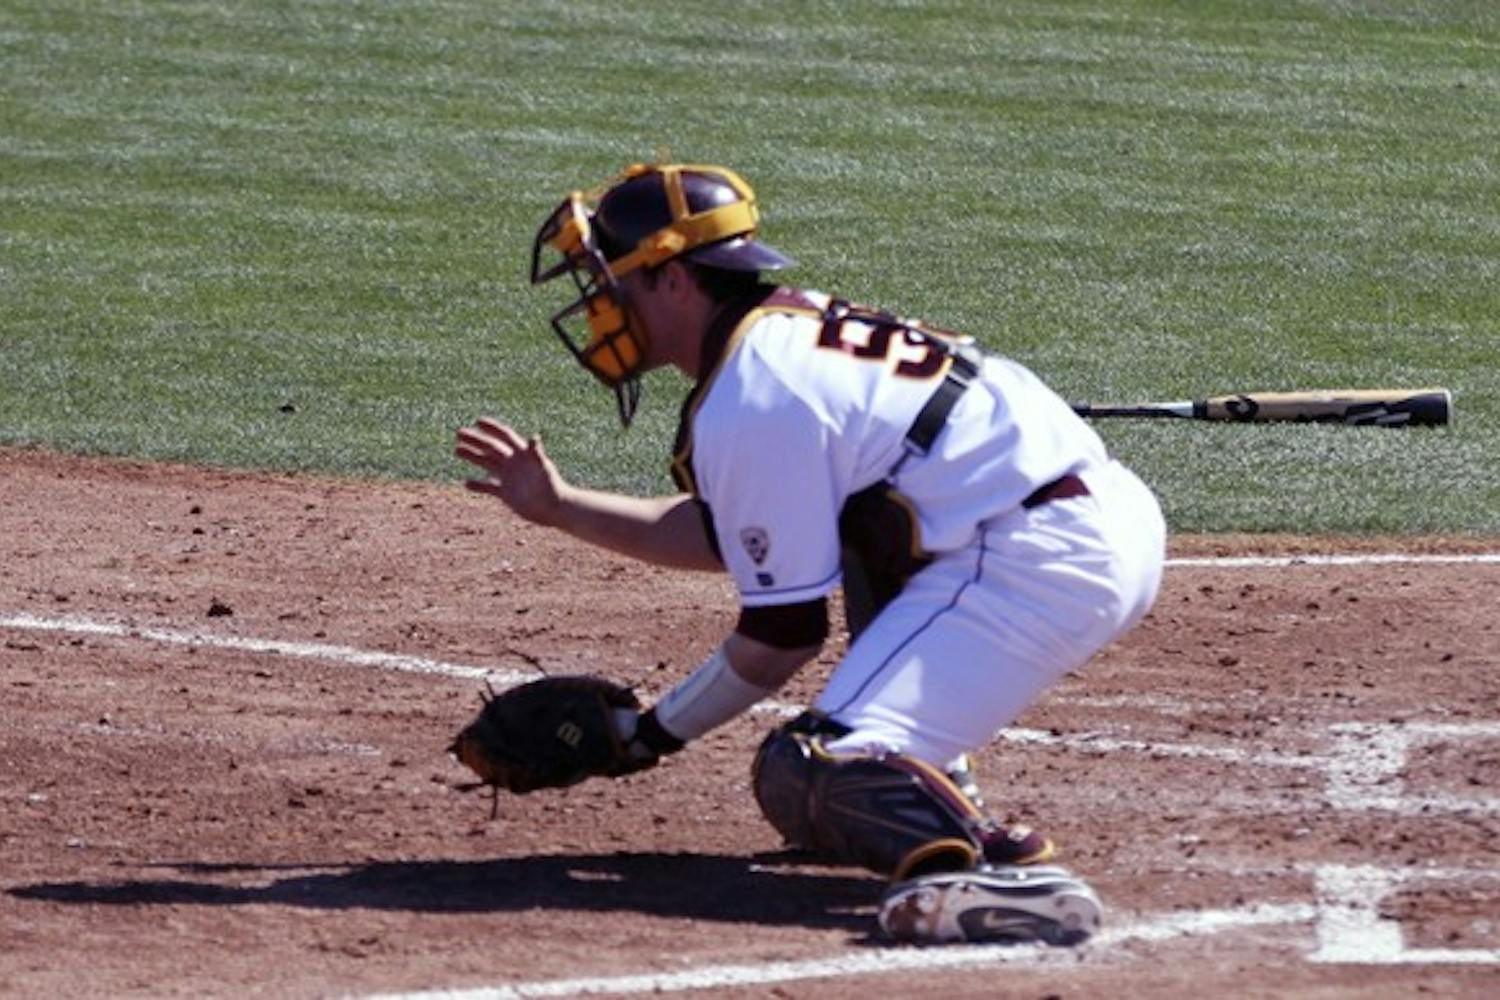 SUN DEVIL SWEEP: Senior outfielder/pitcher Kole Calhoun goes for a hit in last week's game against Northern Illinois. The Sun Devils played four games against Towson this week, sweeping them in each game. (Photo by Scott Stuk)